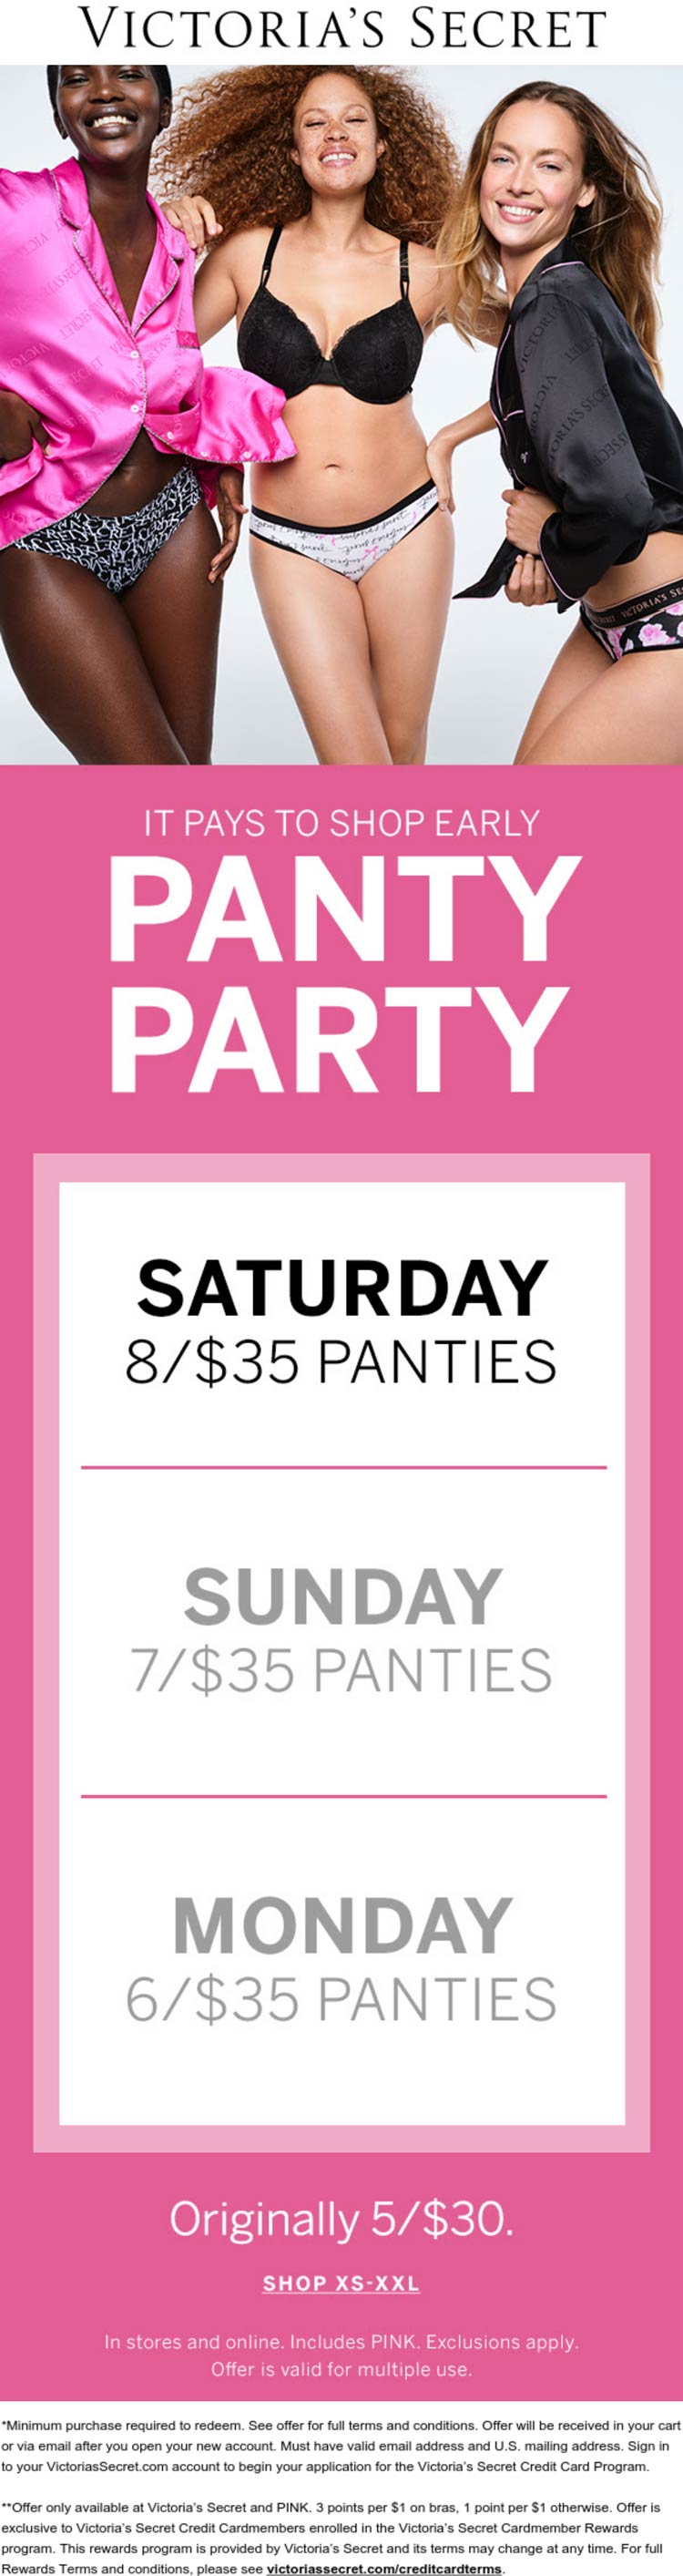 Victorias Secret stores Coupon  8 panties for $35 at Victorias Secret, ditto online #victoriassecret 